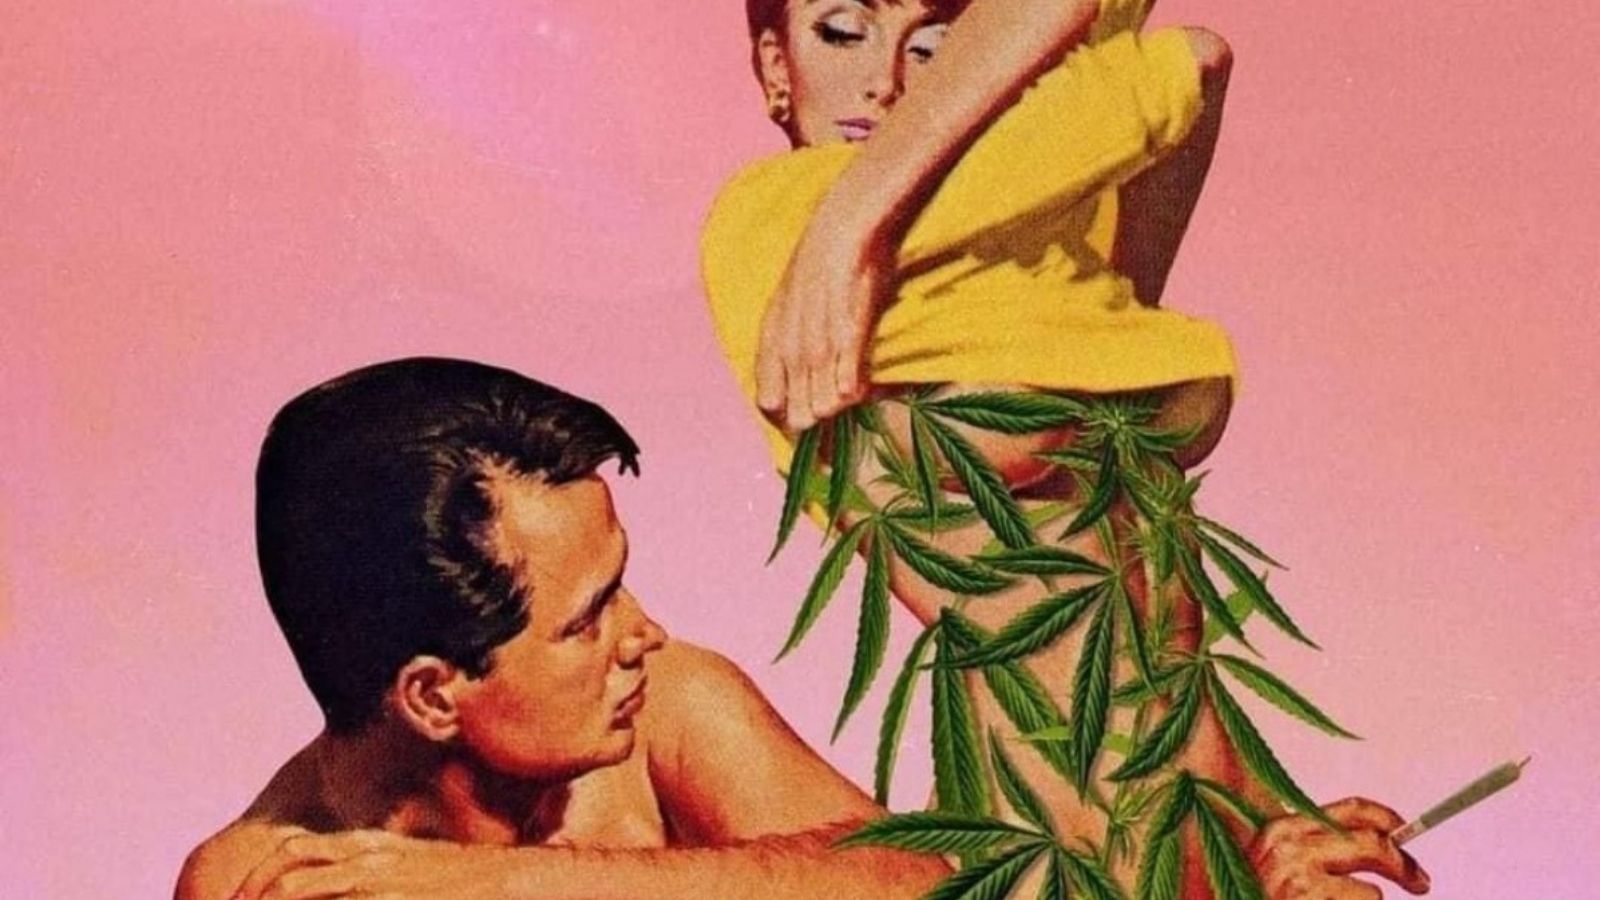 A woman covered in cannabis leaves is watched by a man smoking a joint